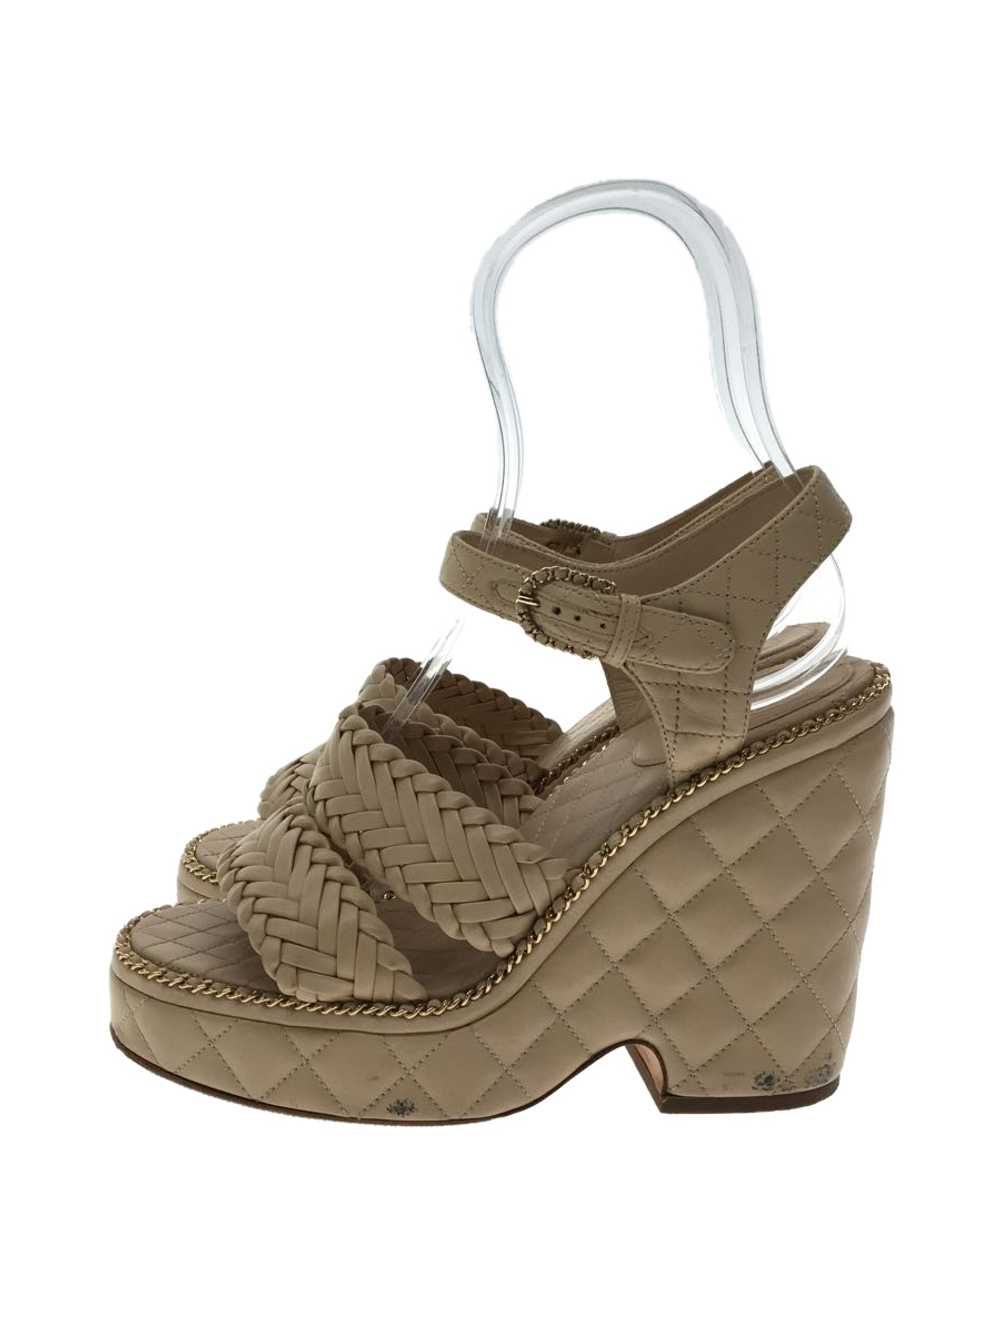 Chanel Sandals/38/Beige/Leather/Here Mark/Wedge S… - image 1